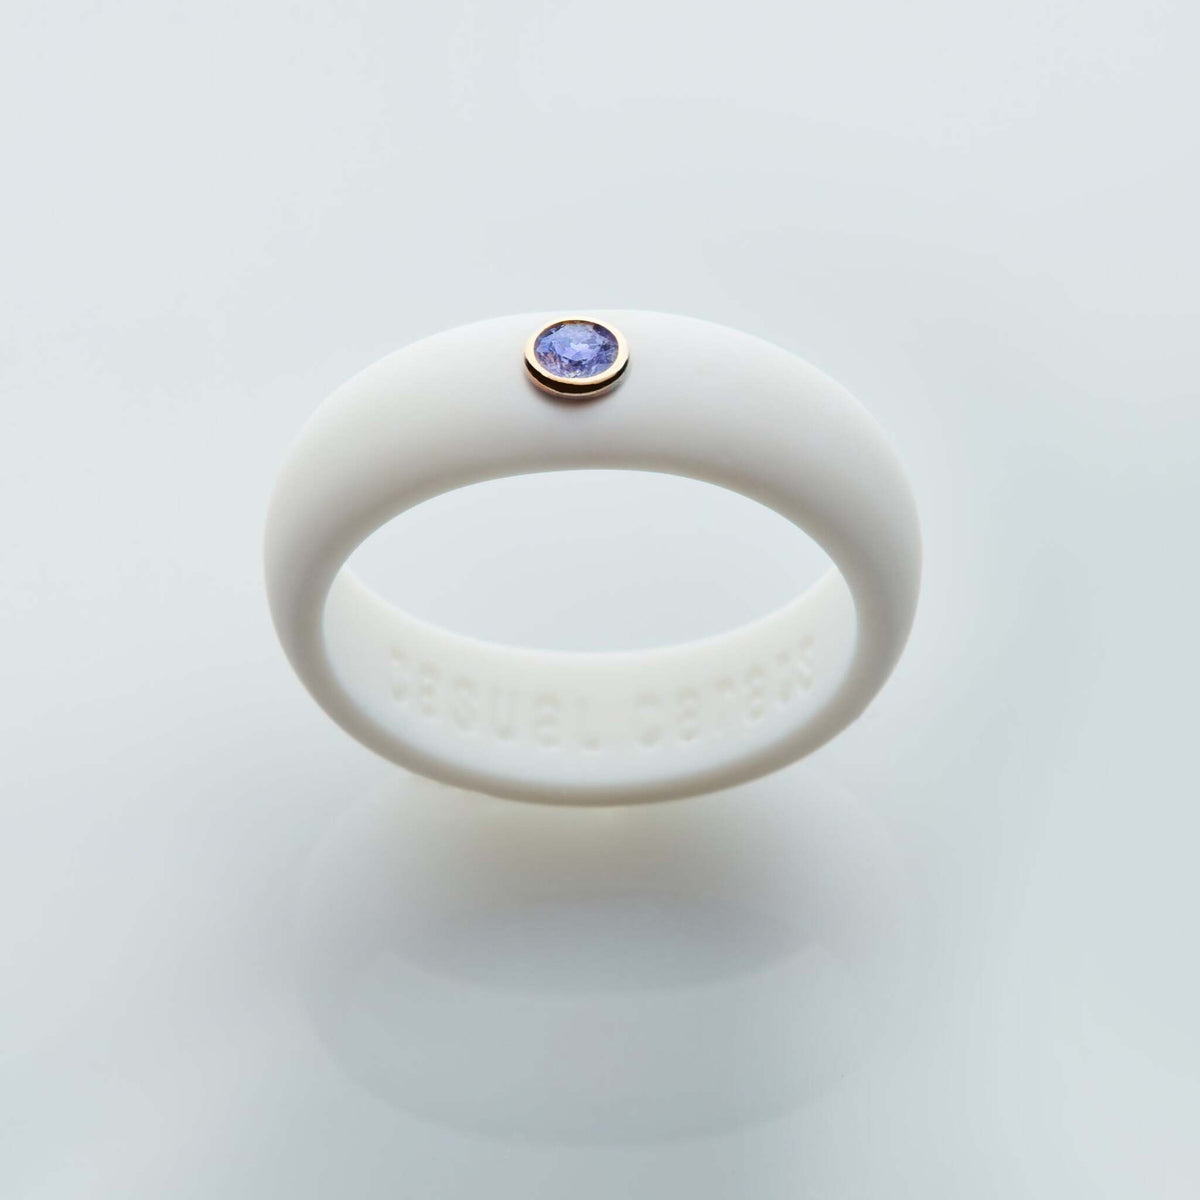 Casual Carats - Birthstone Collection - December - Tanzanite Silicone Ring / Available in a Variety of Silicone Band Colors